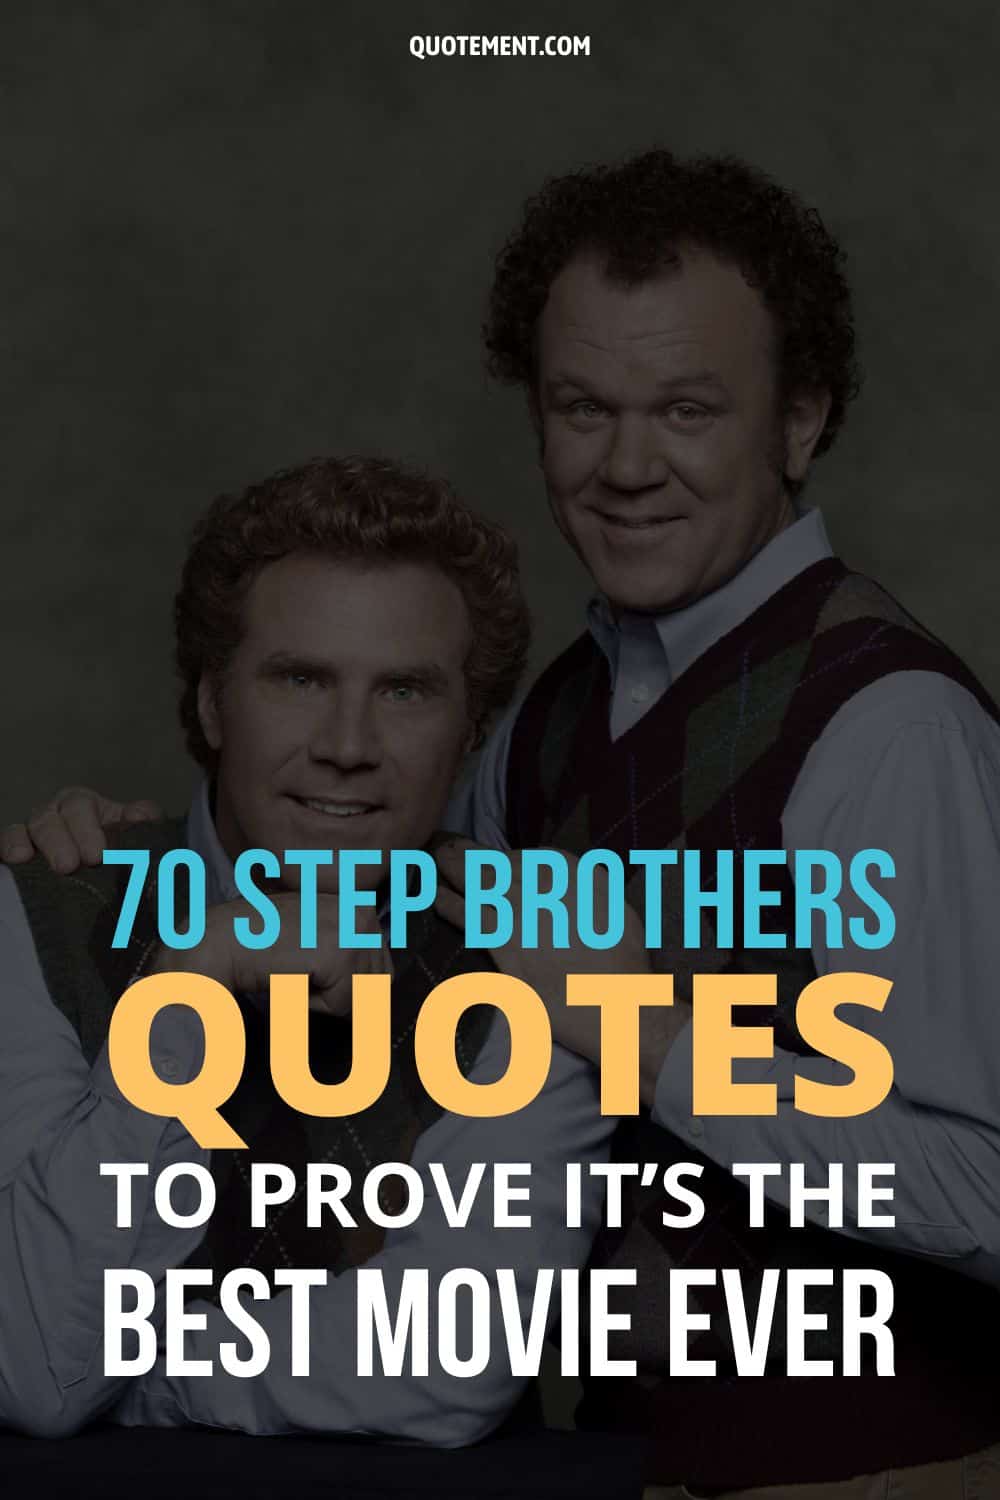 70 Step Brothers Quotes To Prove It’s The Best Movie Ever
